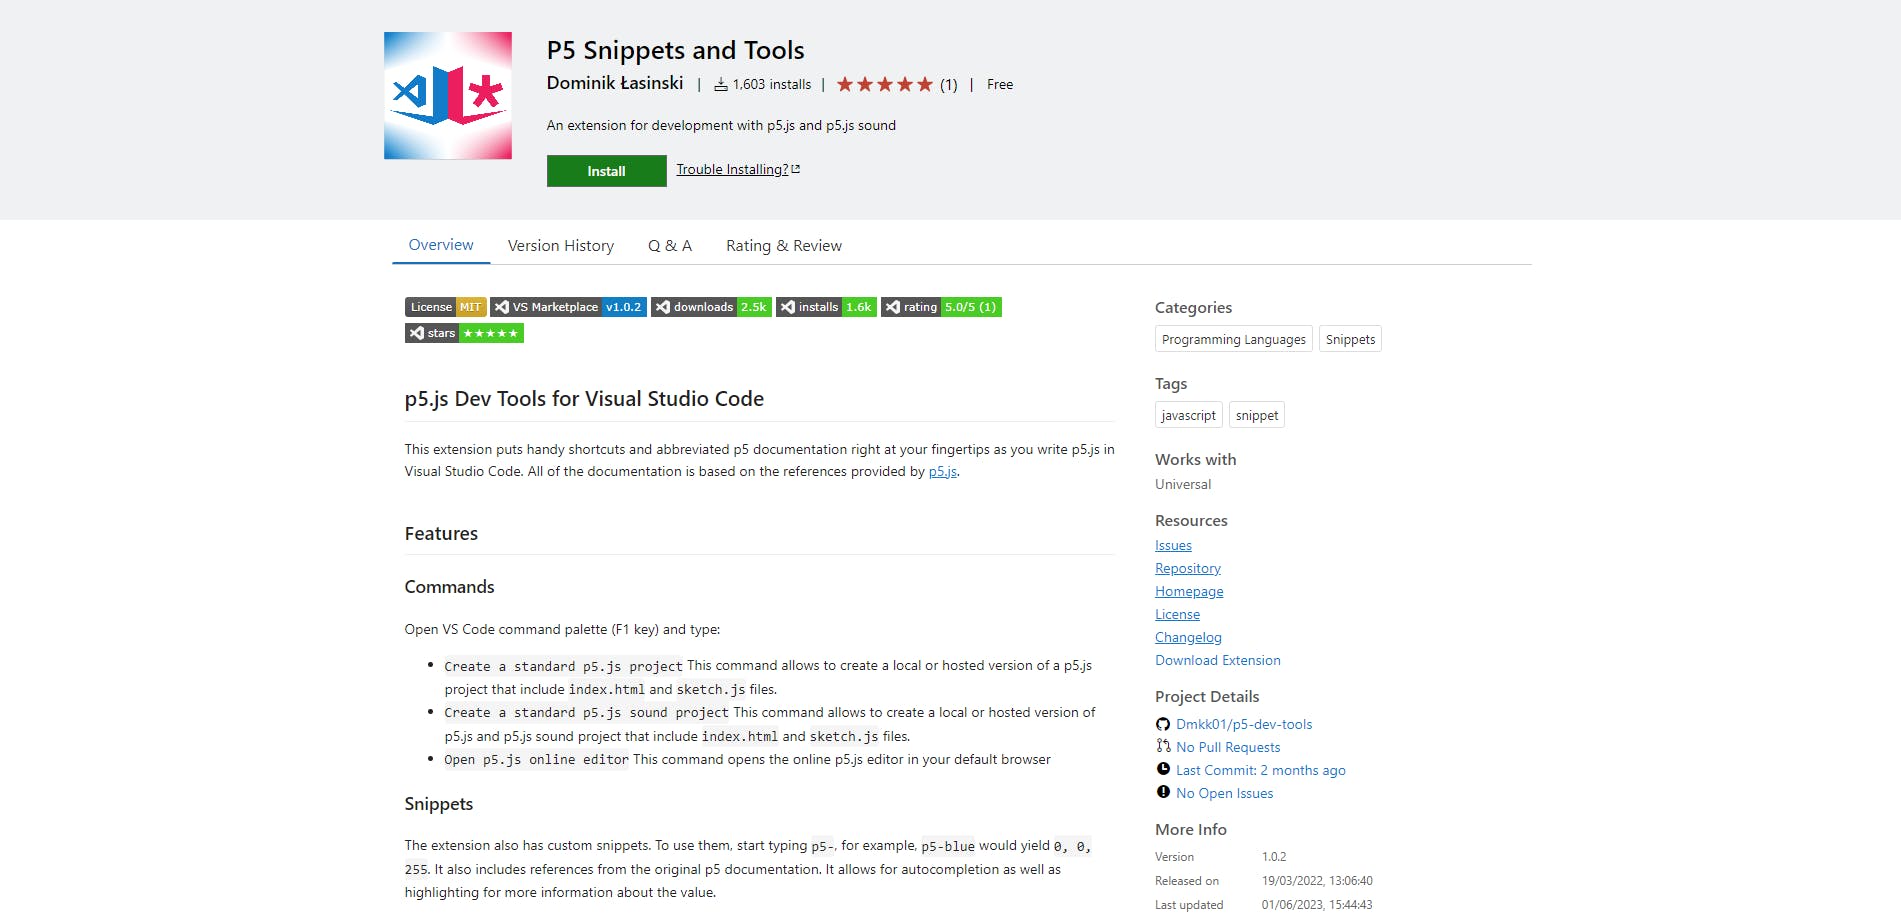 P5 Snippets and Tools media 1